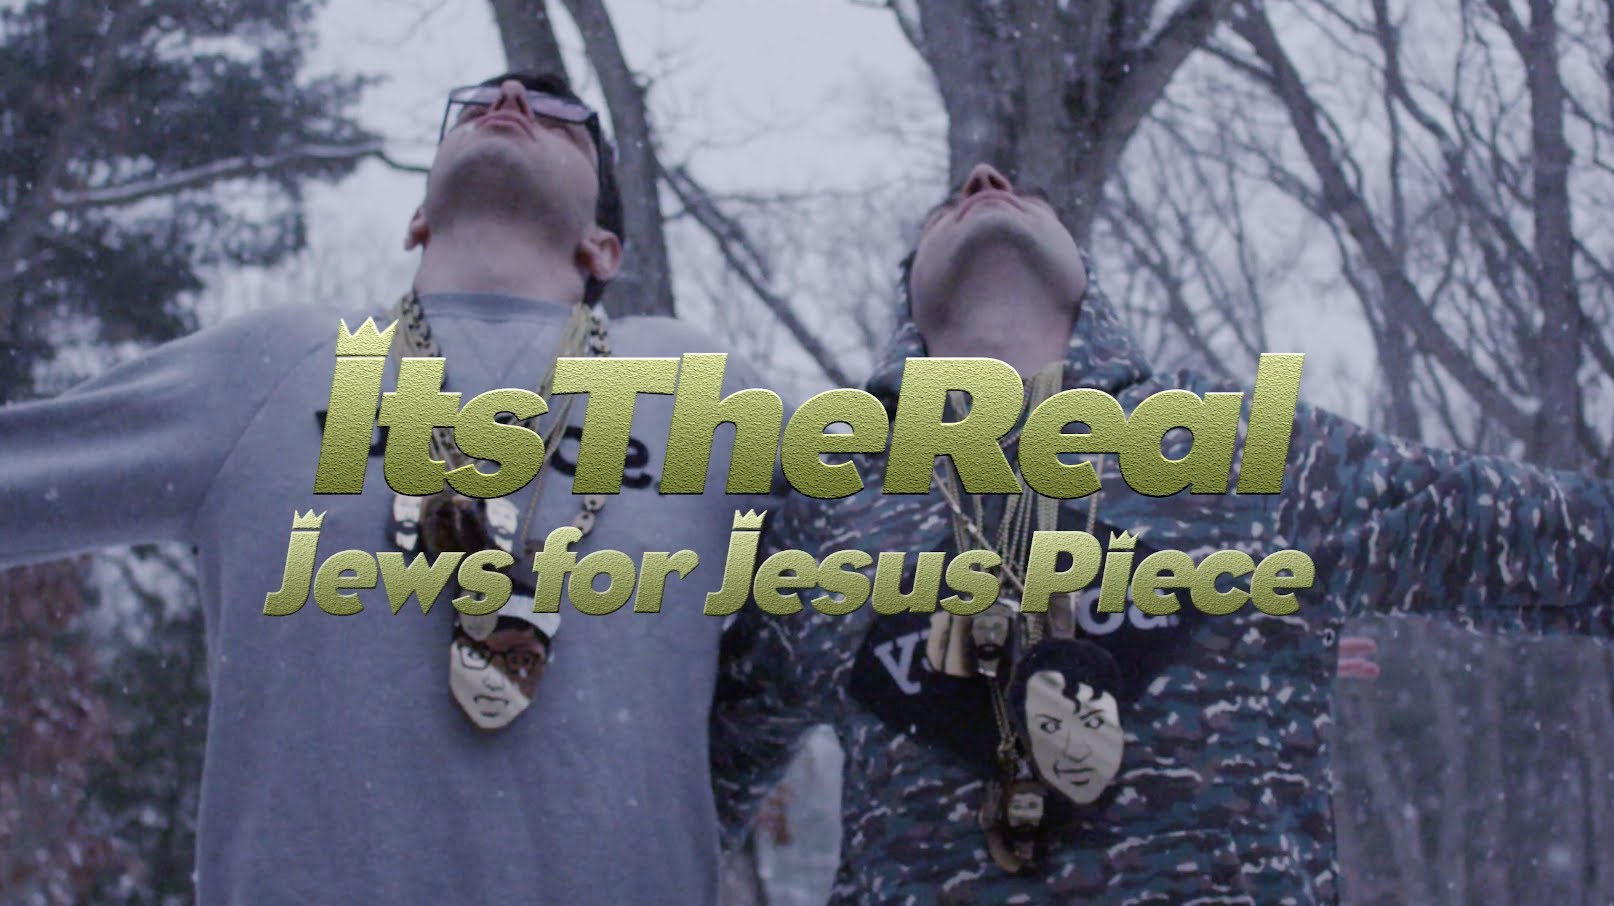 ItsTheReal “Jews For Jesus Piece”